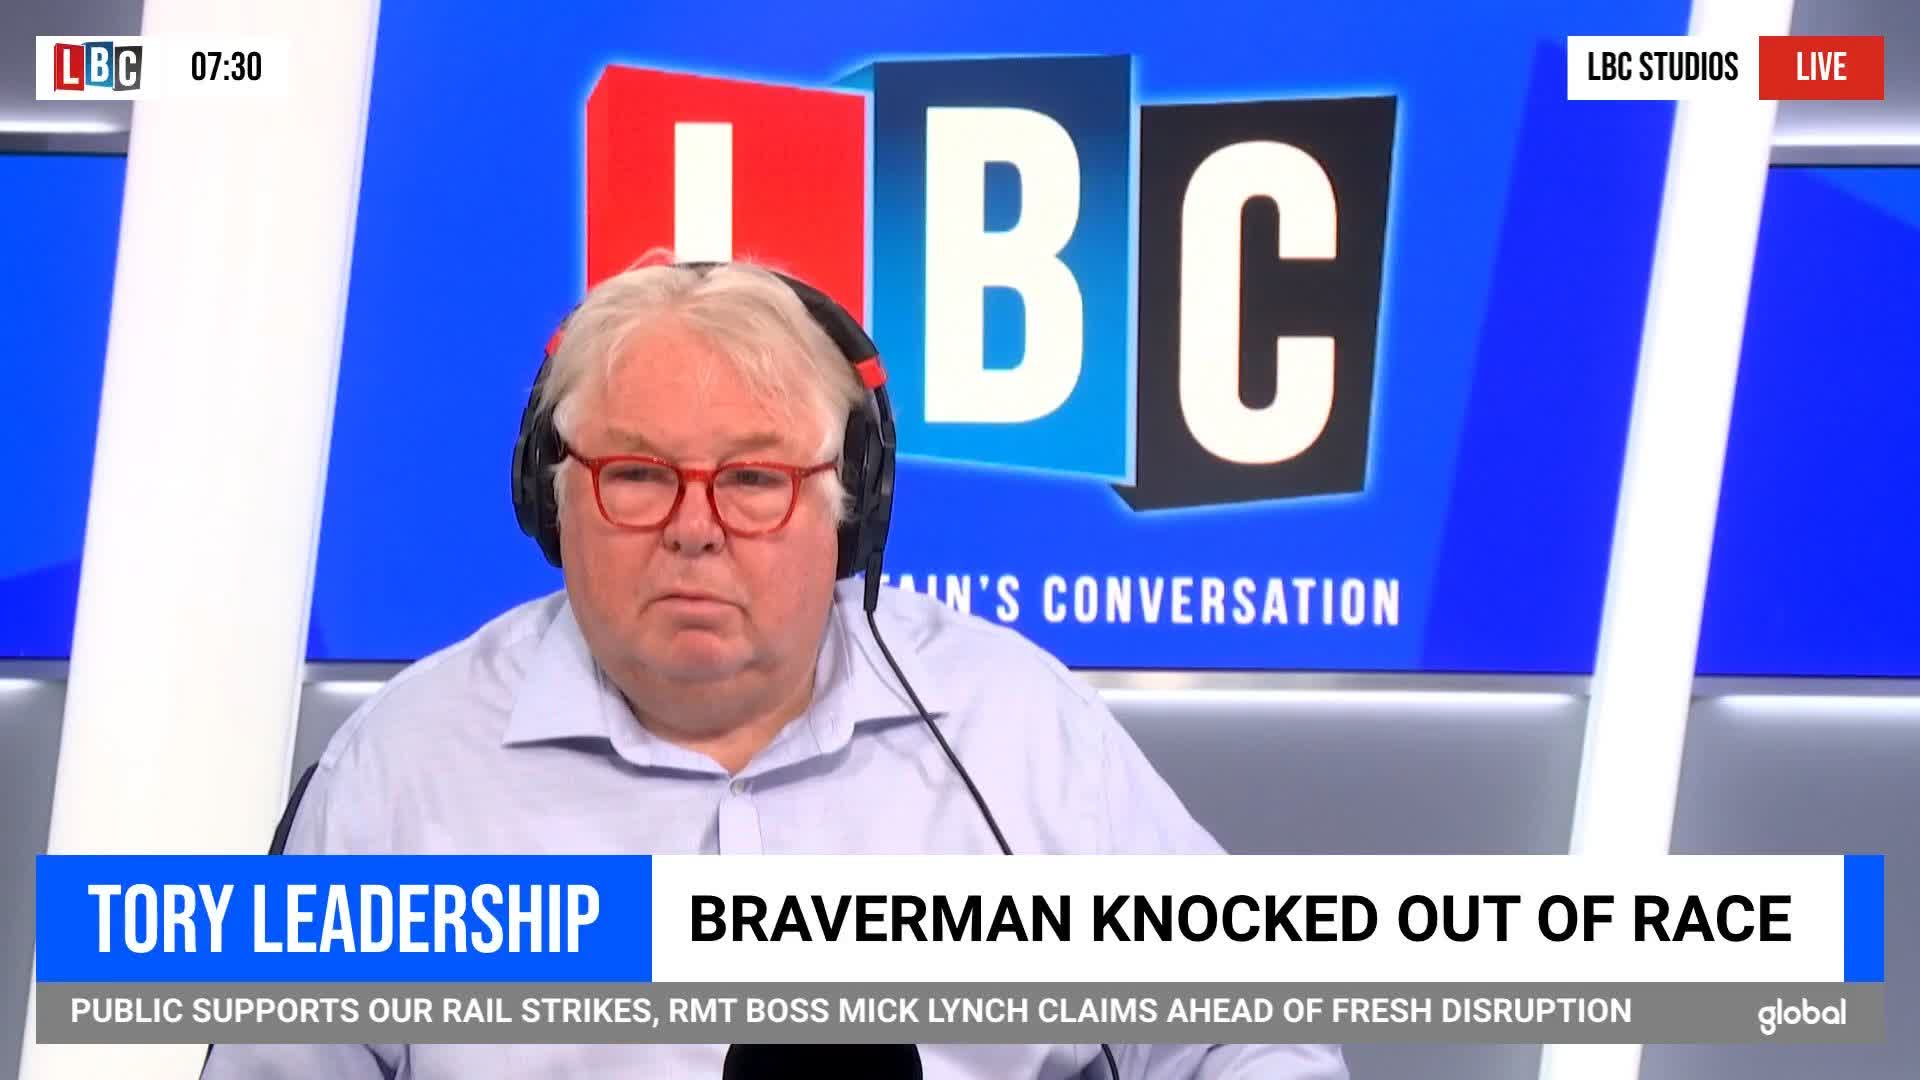 Lbc On Twitter Nick Ferrari Clashes With This Caller Who Uses A Second Hand Tyre Analogy To 